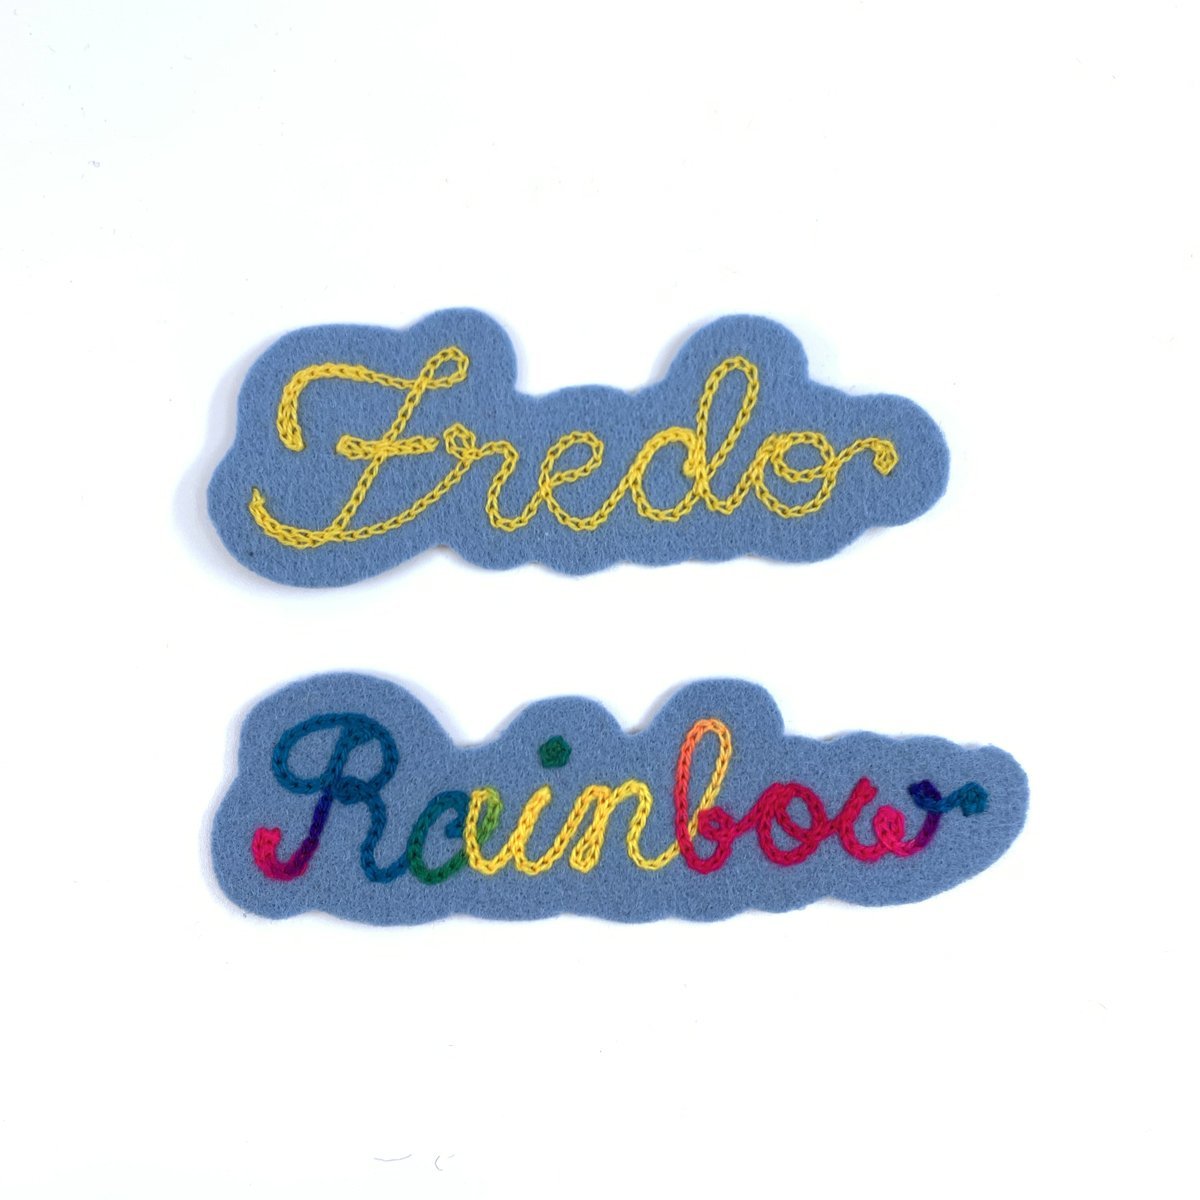 Custom Chain Stitched Embroidered Name Patch - Felt